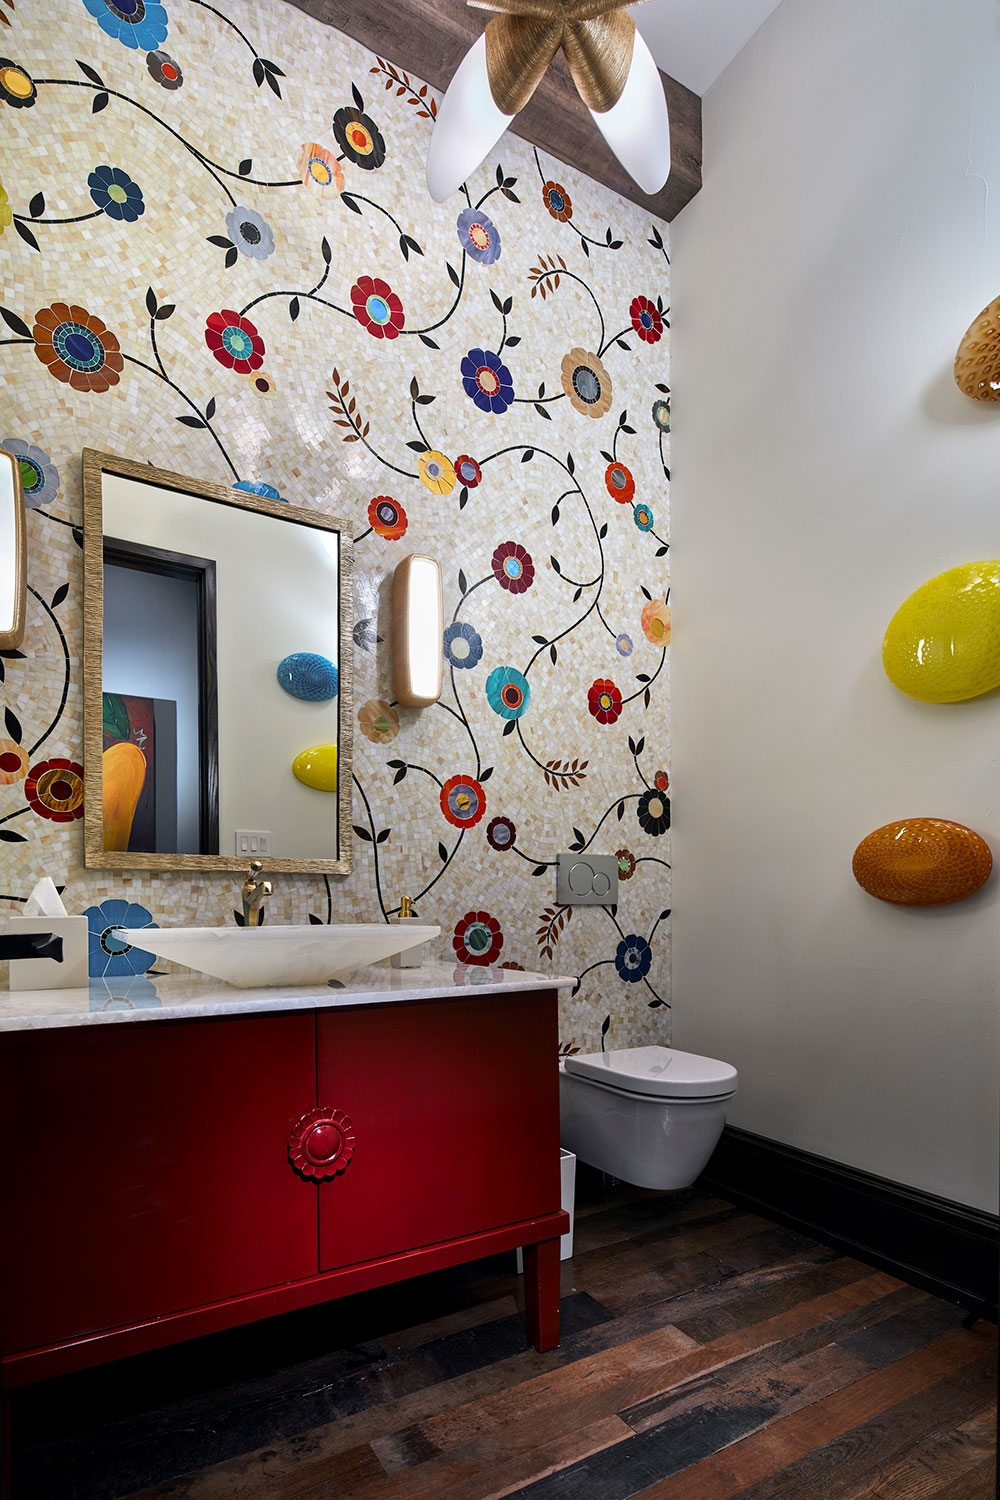 Colorful Pool Powder Room with Floral Mosaic Tile Wall